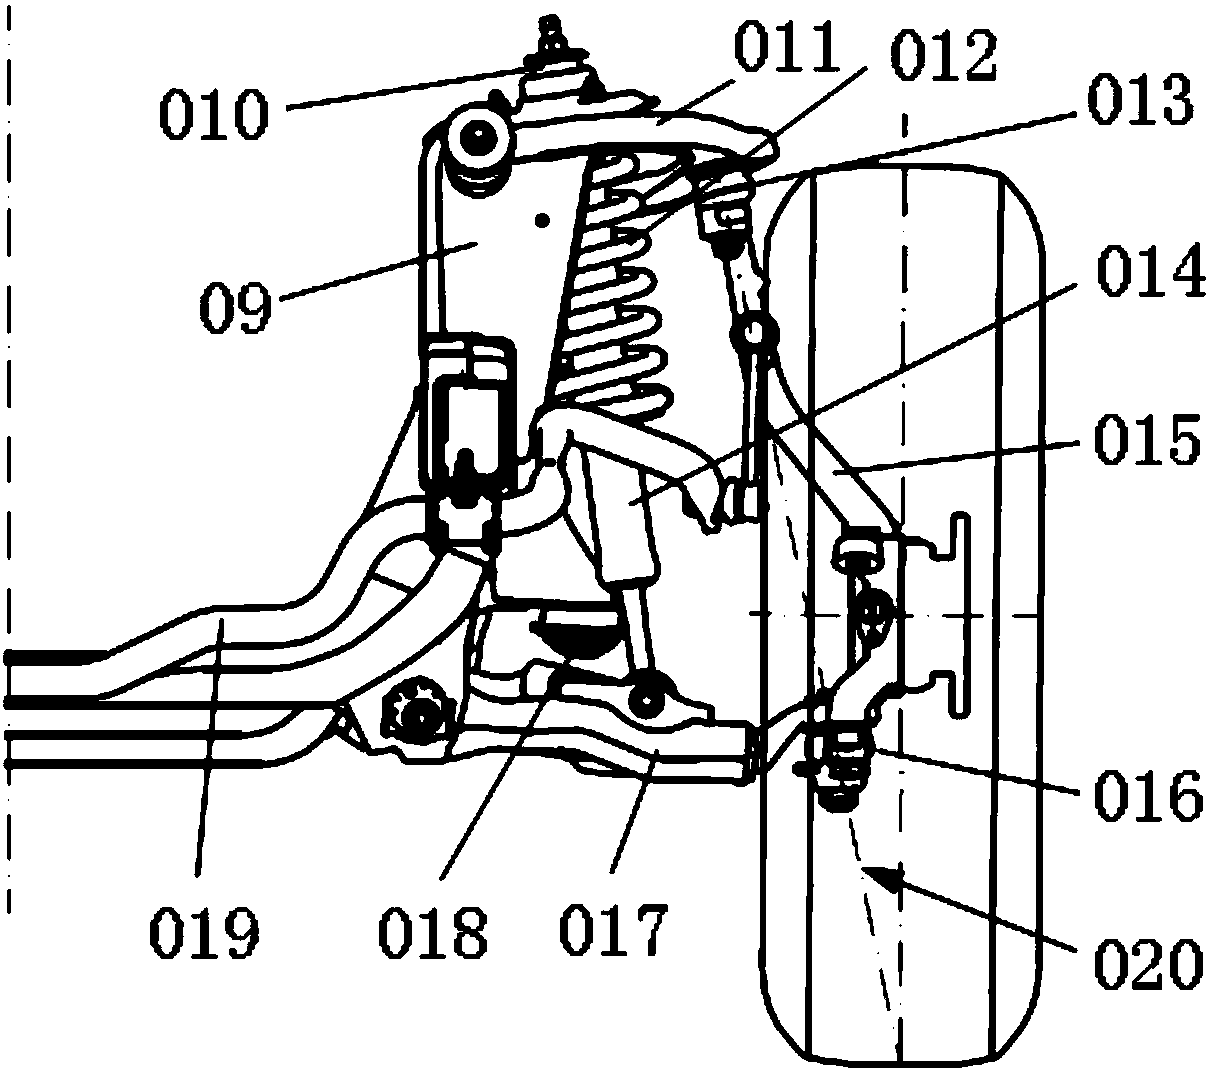 Steering pair placed on double-wishbone independent suspension and car provided with same